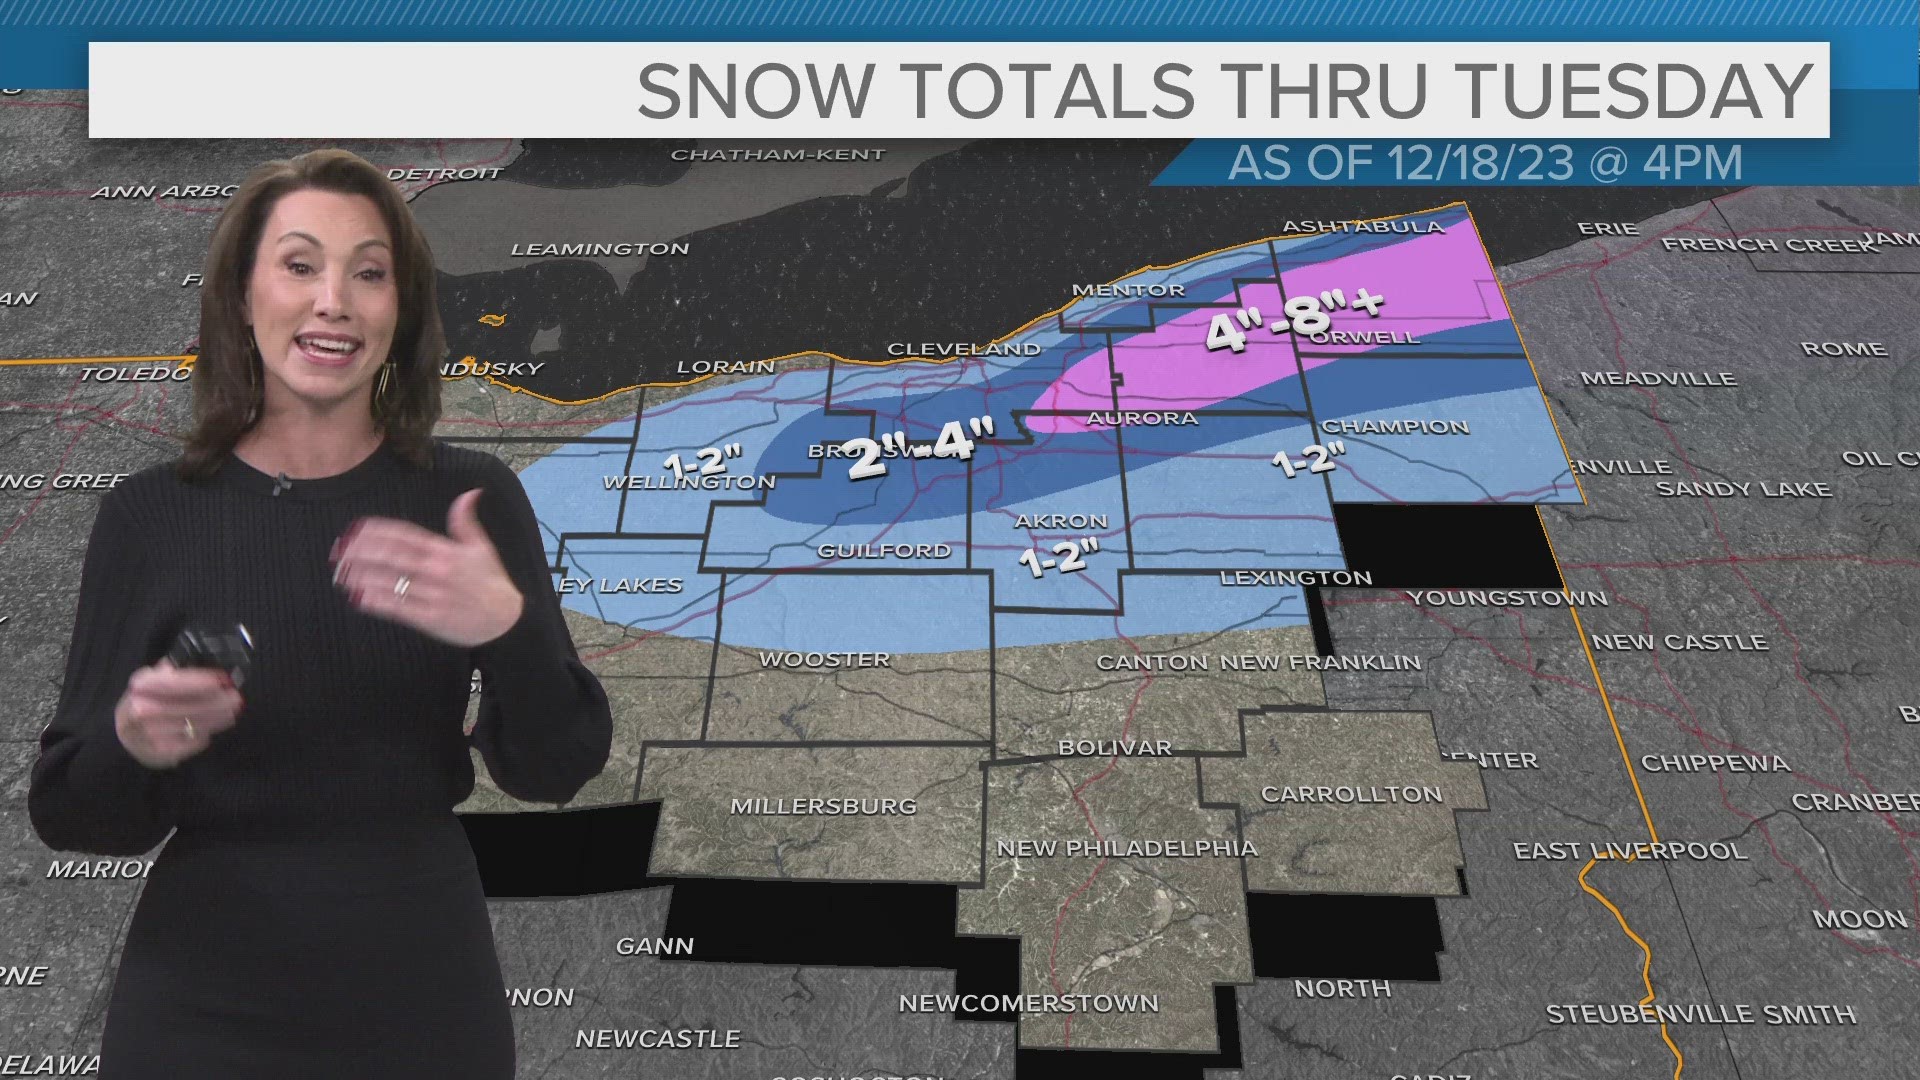 We are providing real-time weather and traffic updates as accumulating snow impacts Northeast Ohio.